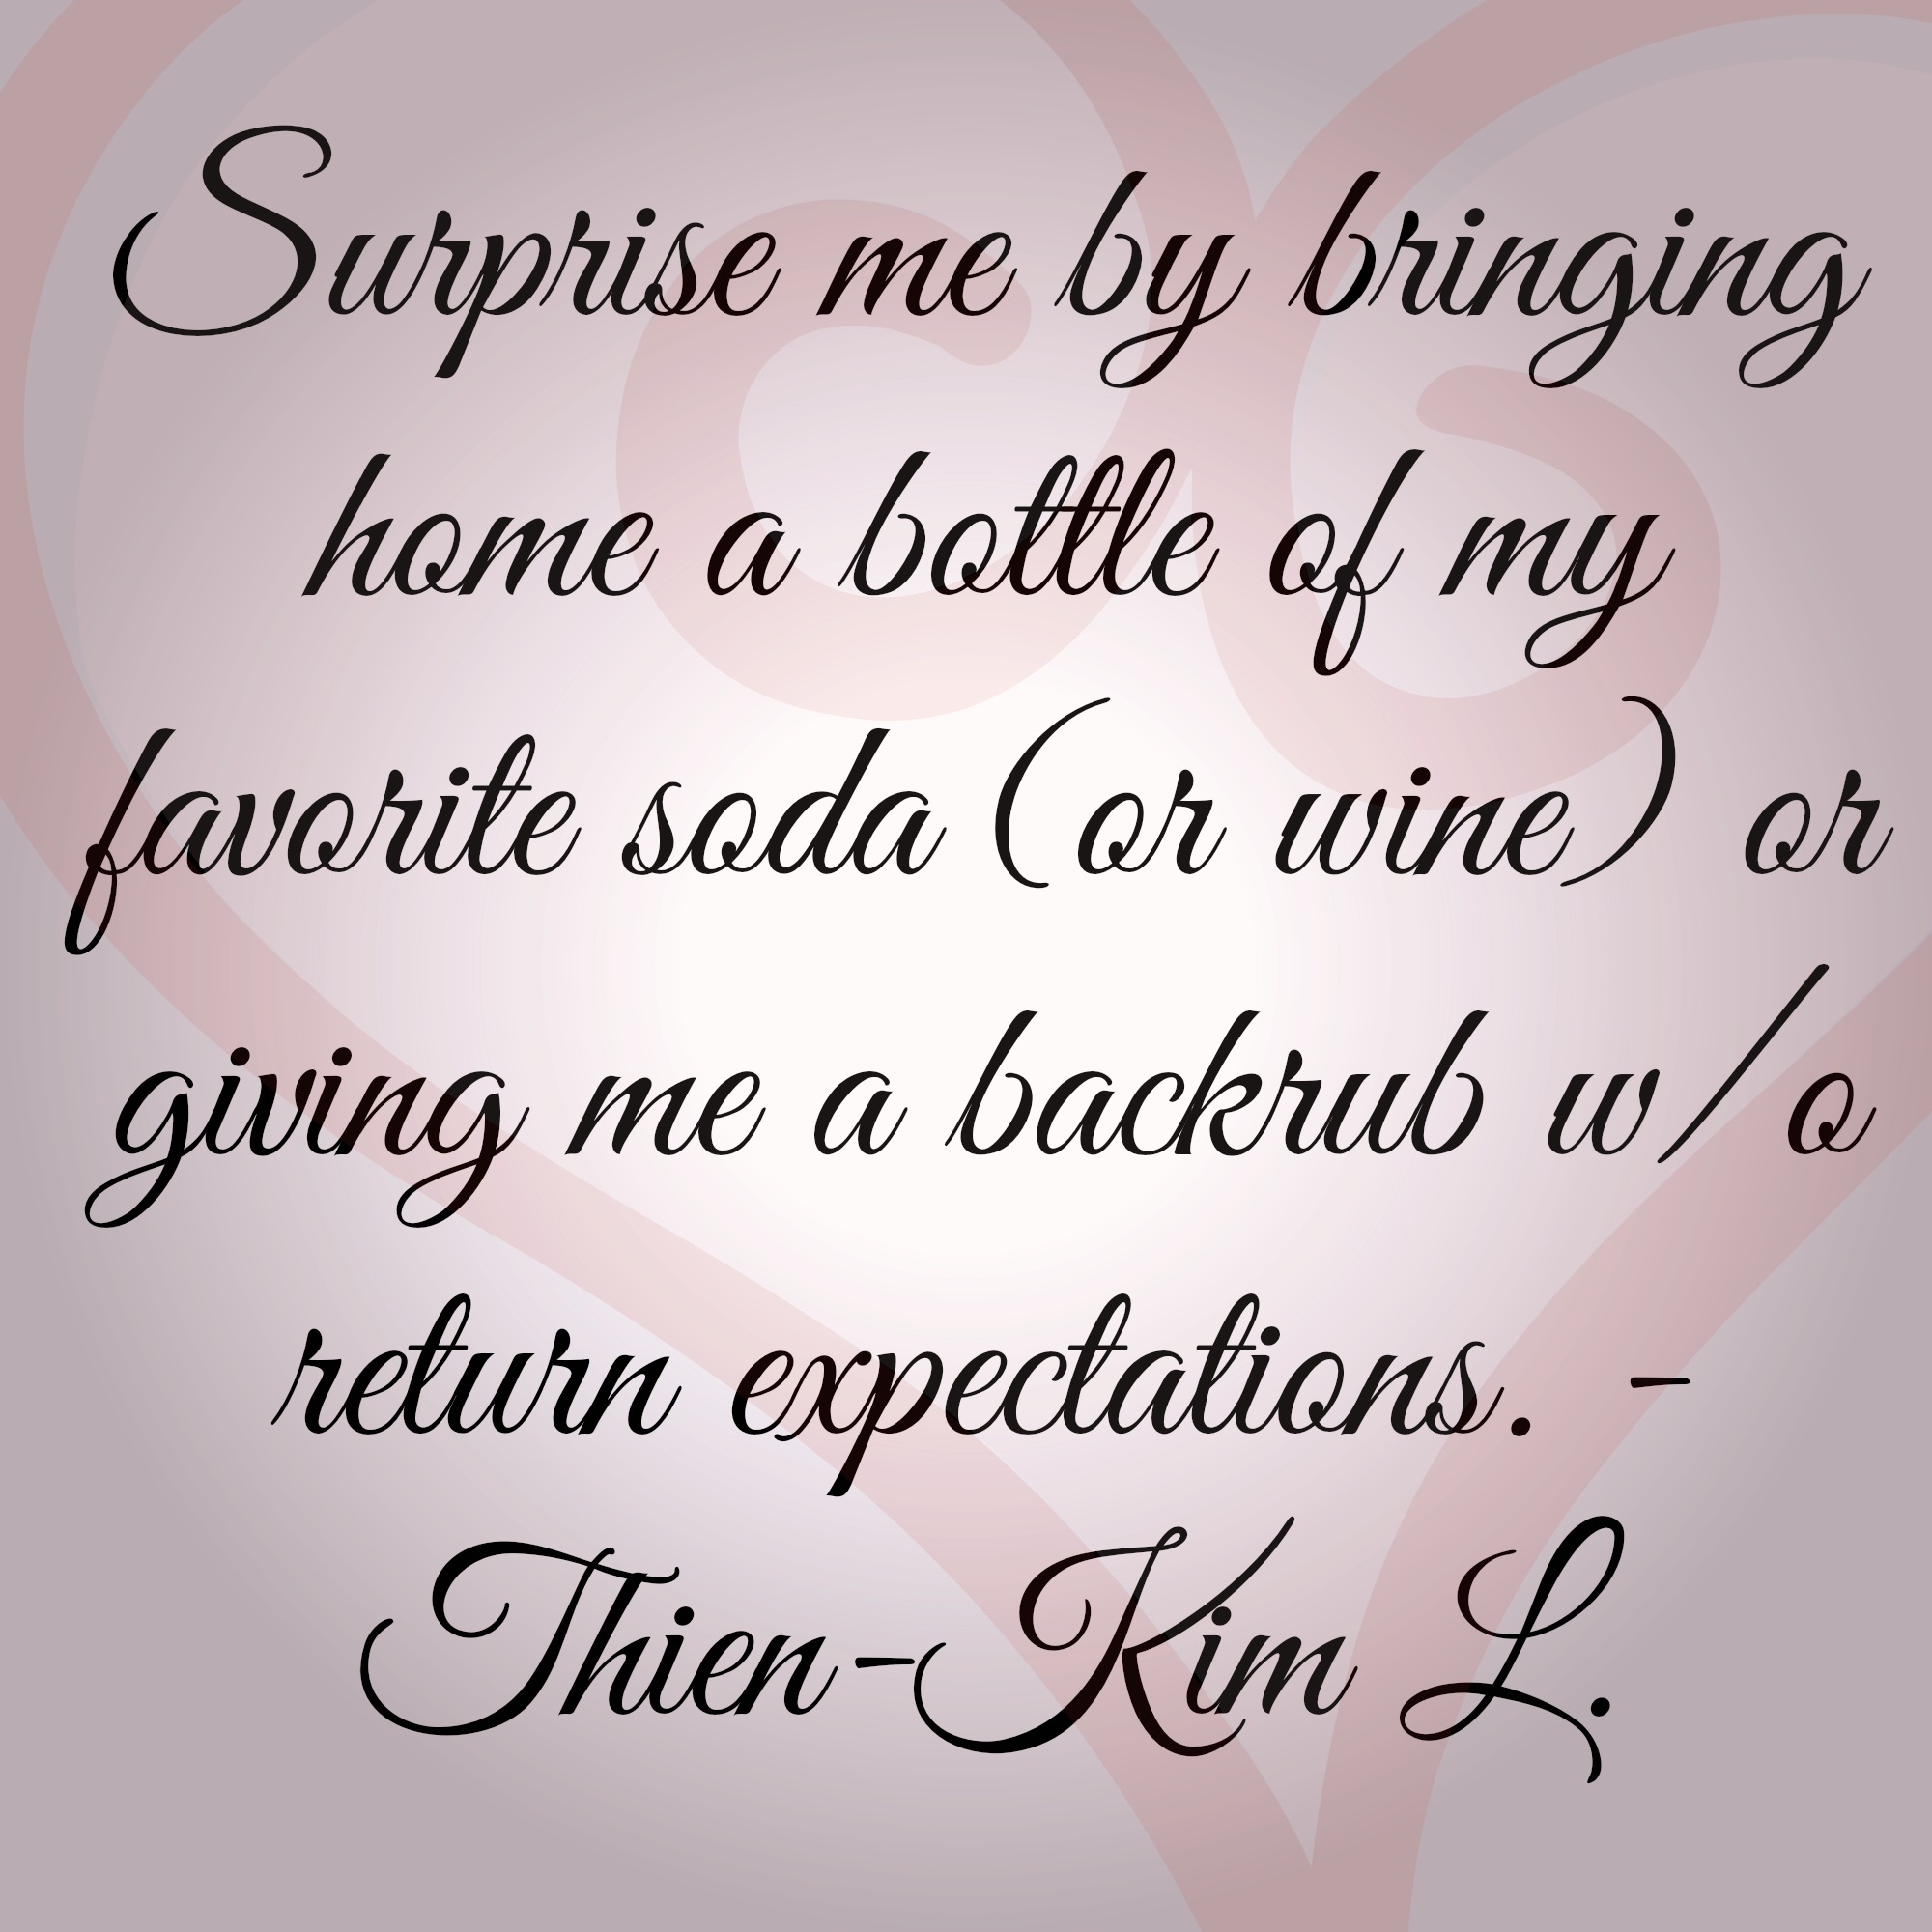 Surprise me by bringing home a bottle of my favorite soda (or wine) or giving me a back rub without return expectations.